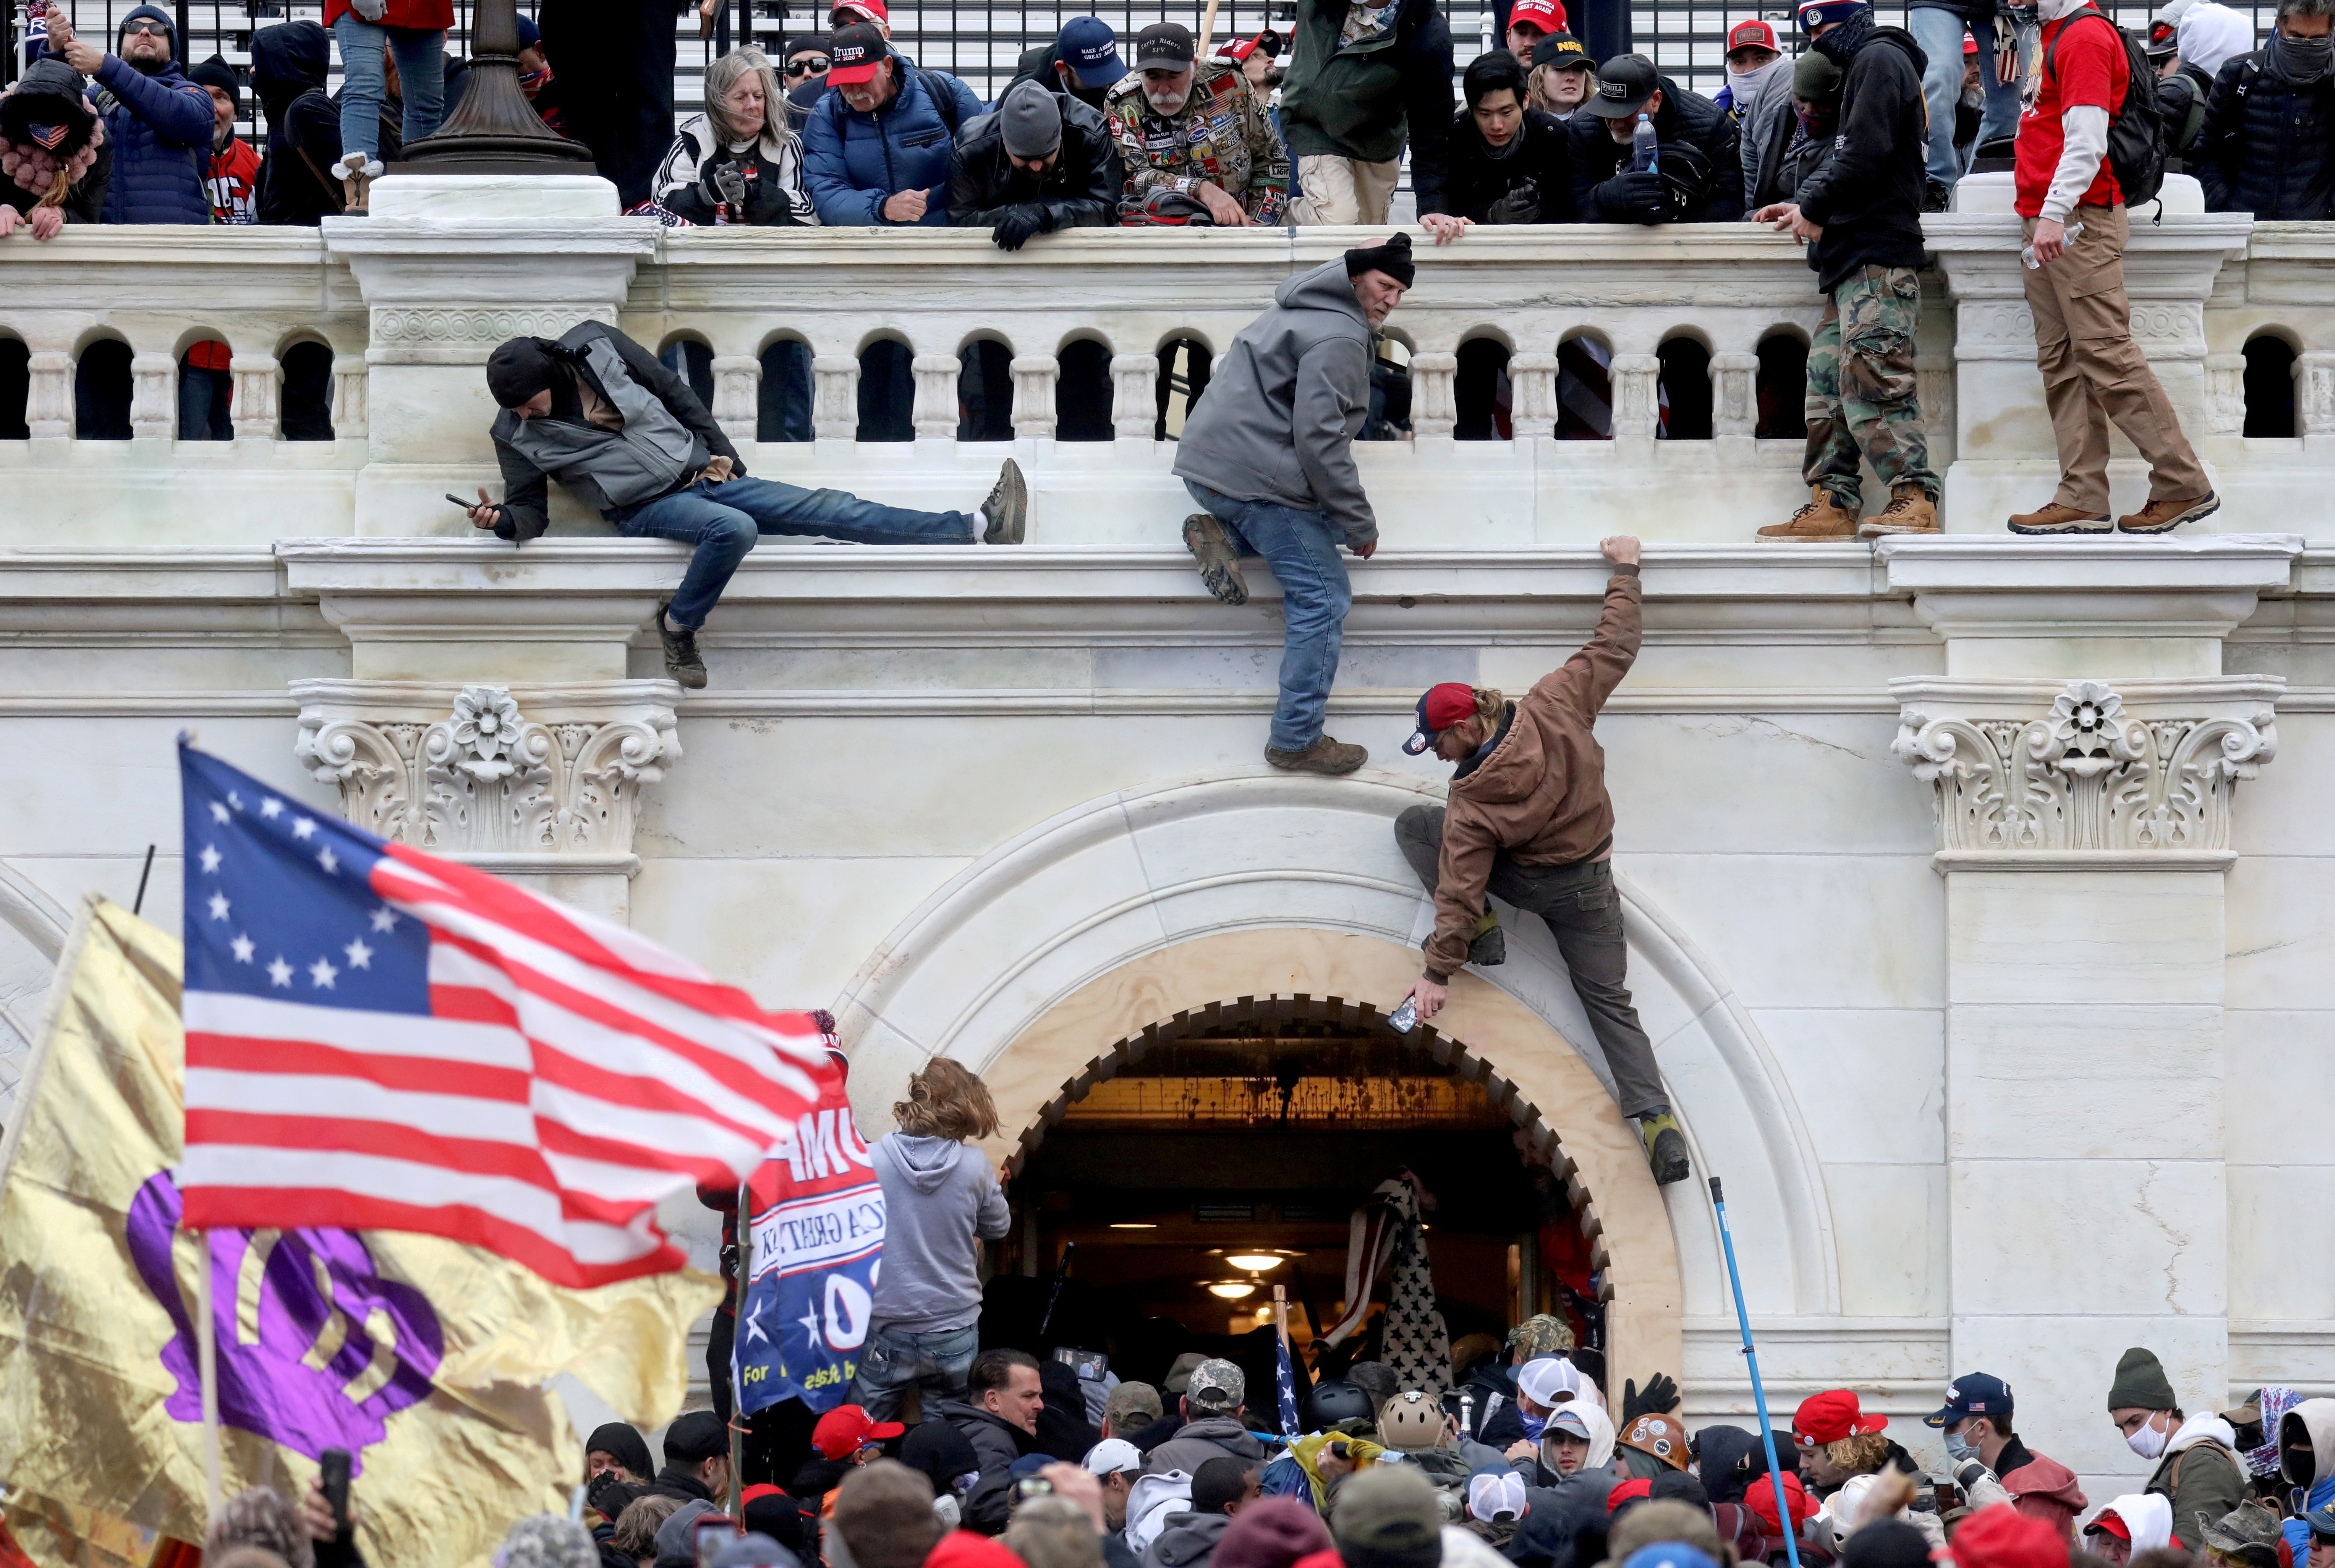 A mob of supporters of U.S. President Donald Trump fight with members of law enforcement at a door they broke open as they storm the U.S. Capitol Building in Washington, U.S., January 6, 2021. REUTERS/Leah Millis/File Photo